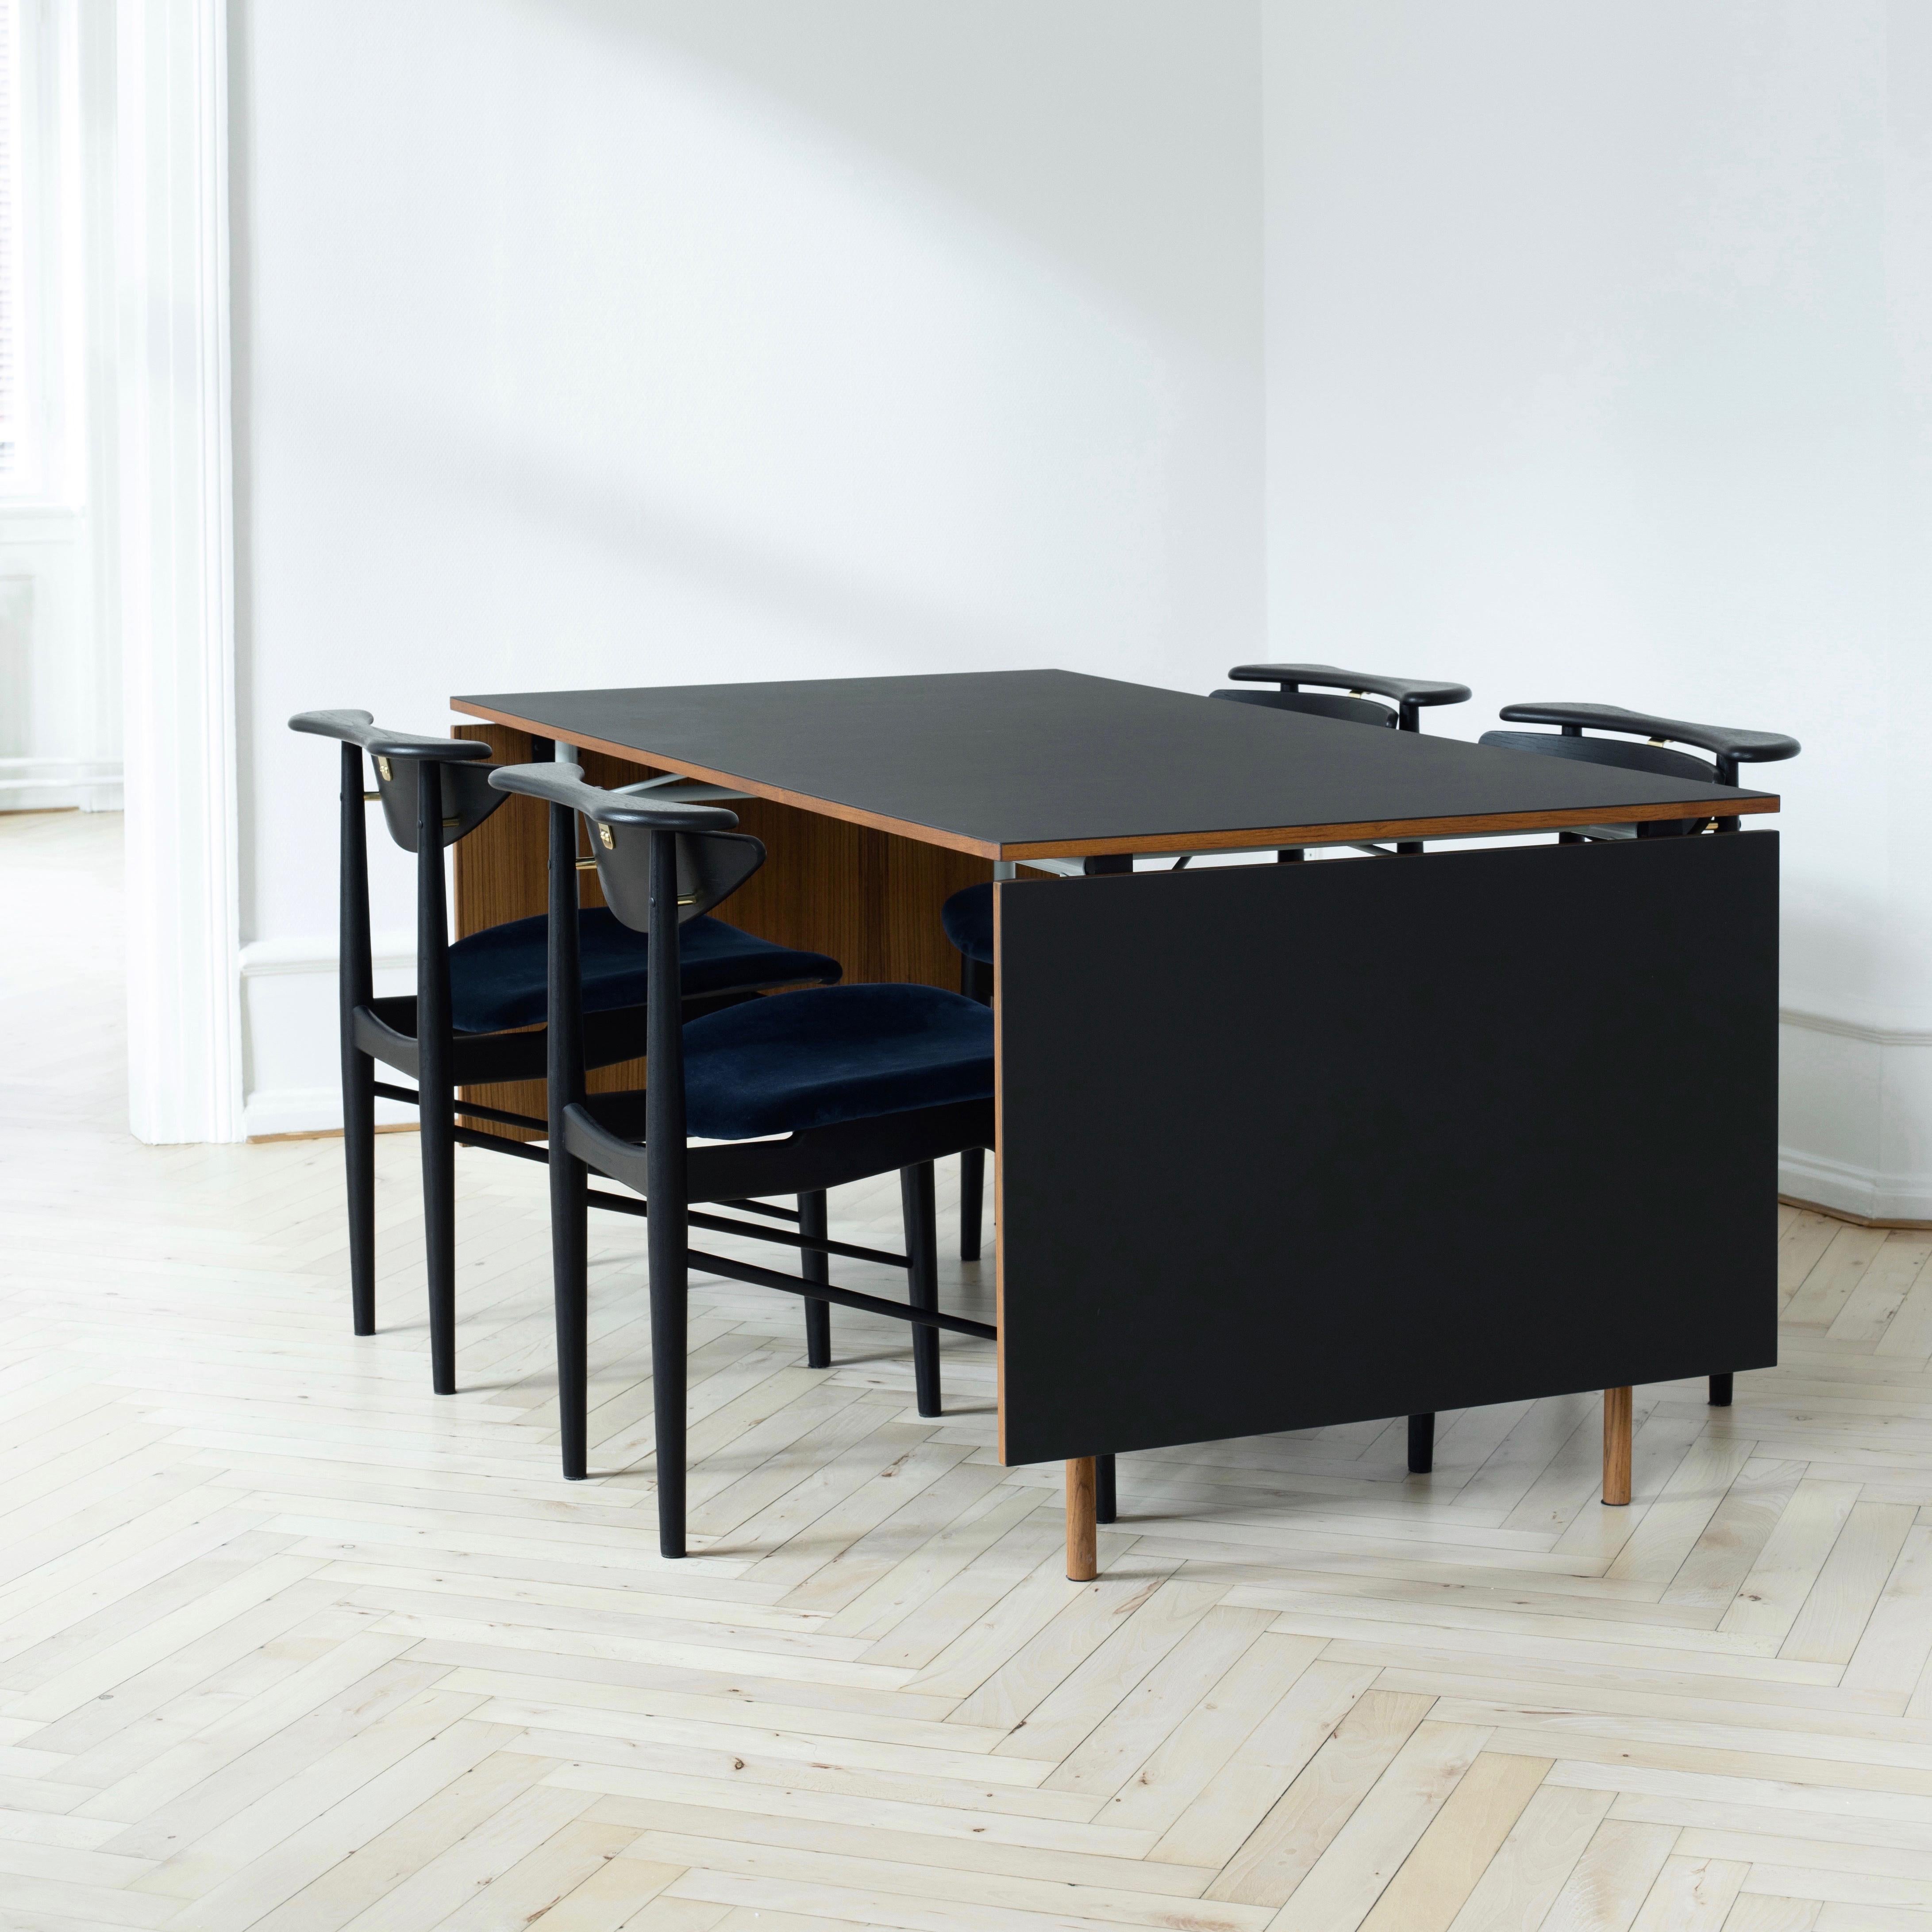 Finn Juhl Nyhavn Dining Table with Two Drop Leaves, Lino and Wood 12